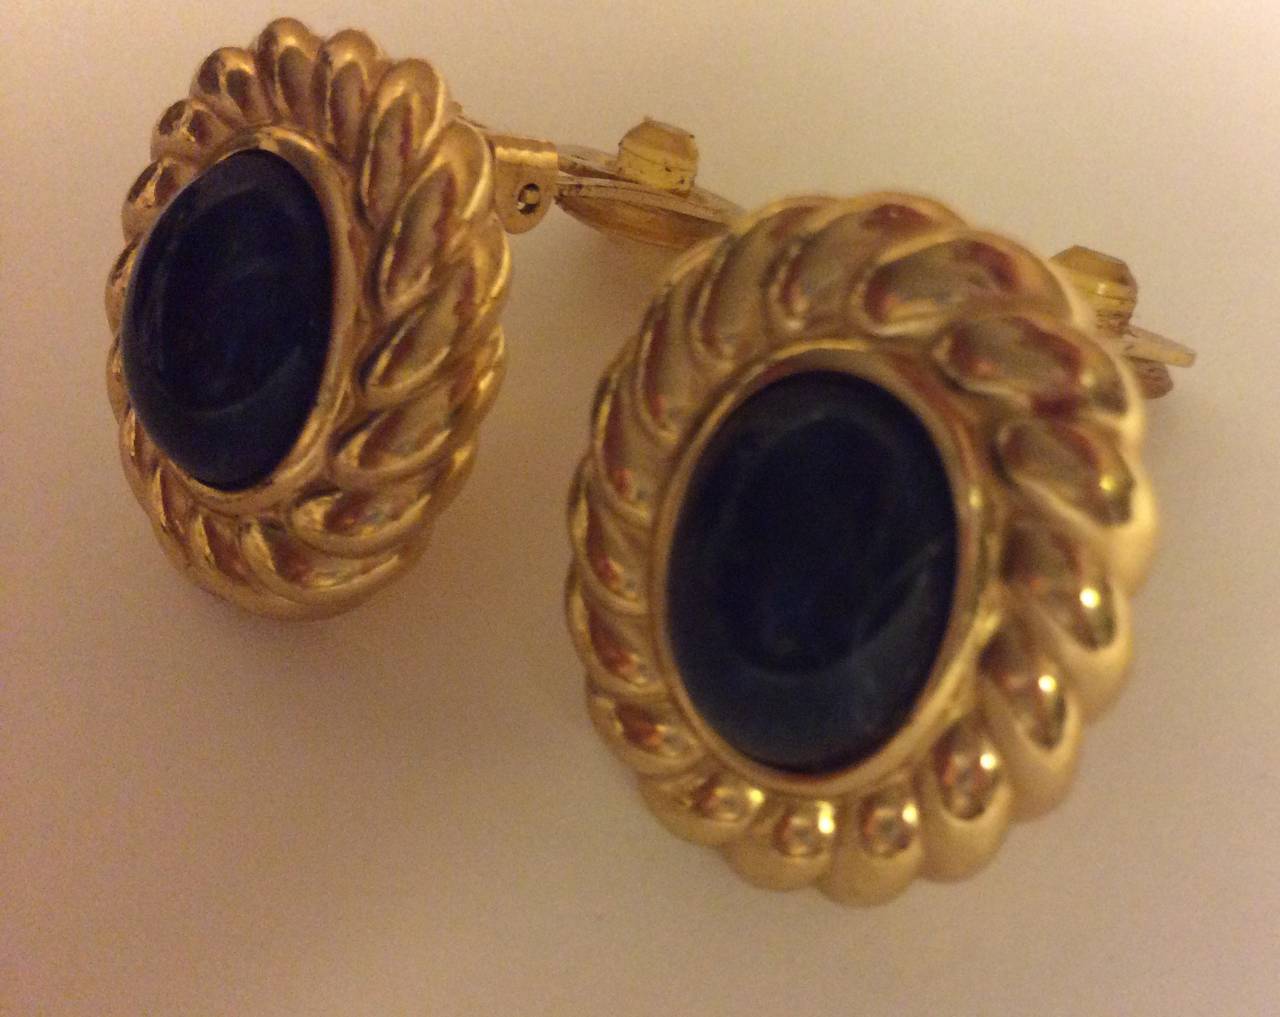 Vintage Christian Dior midnight sapphire oval cabochon with gold fan bezel chip on gold earrings.